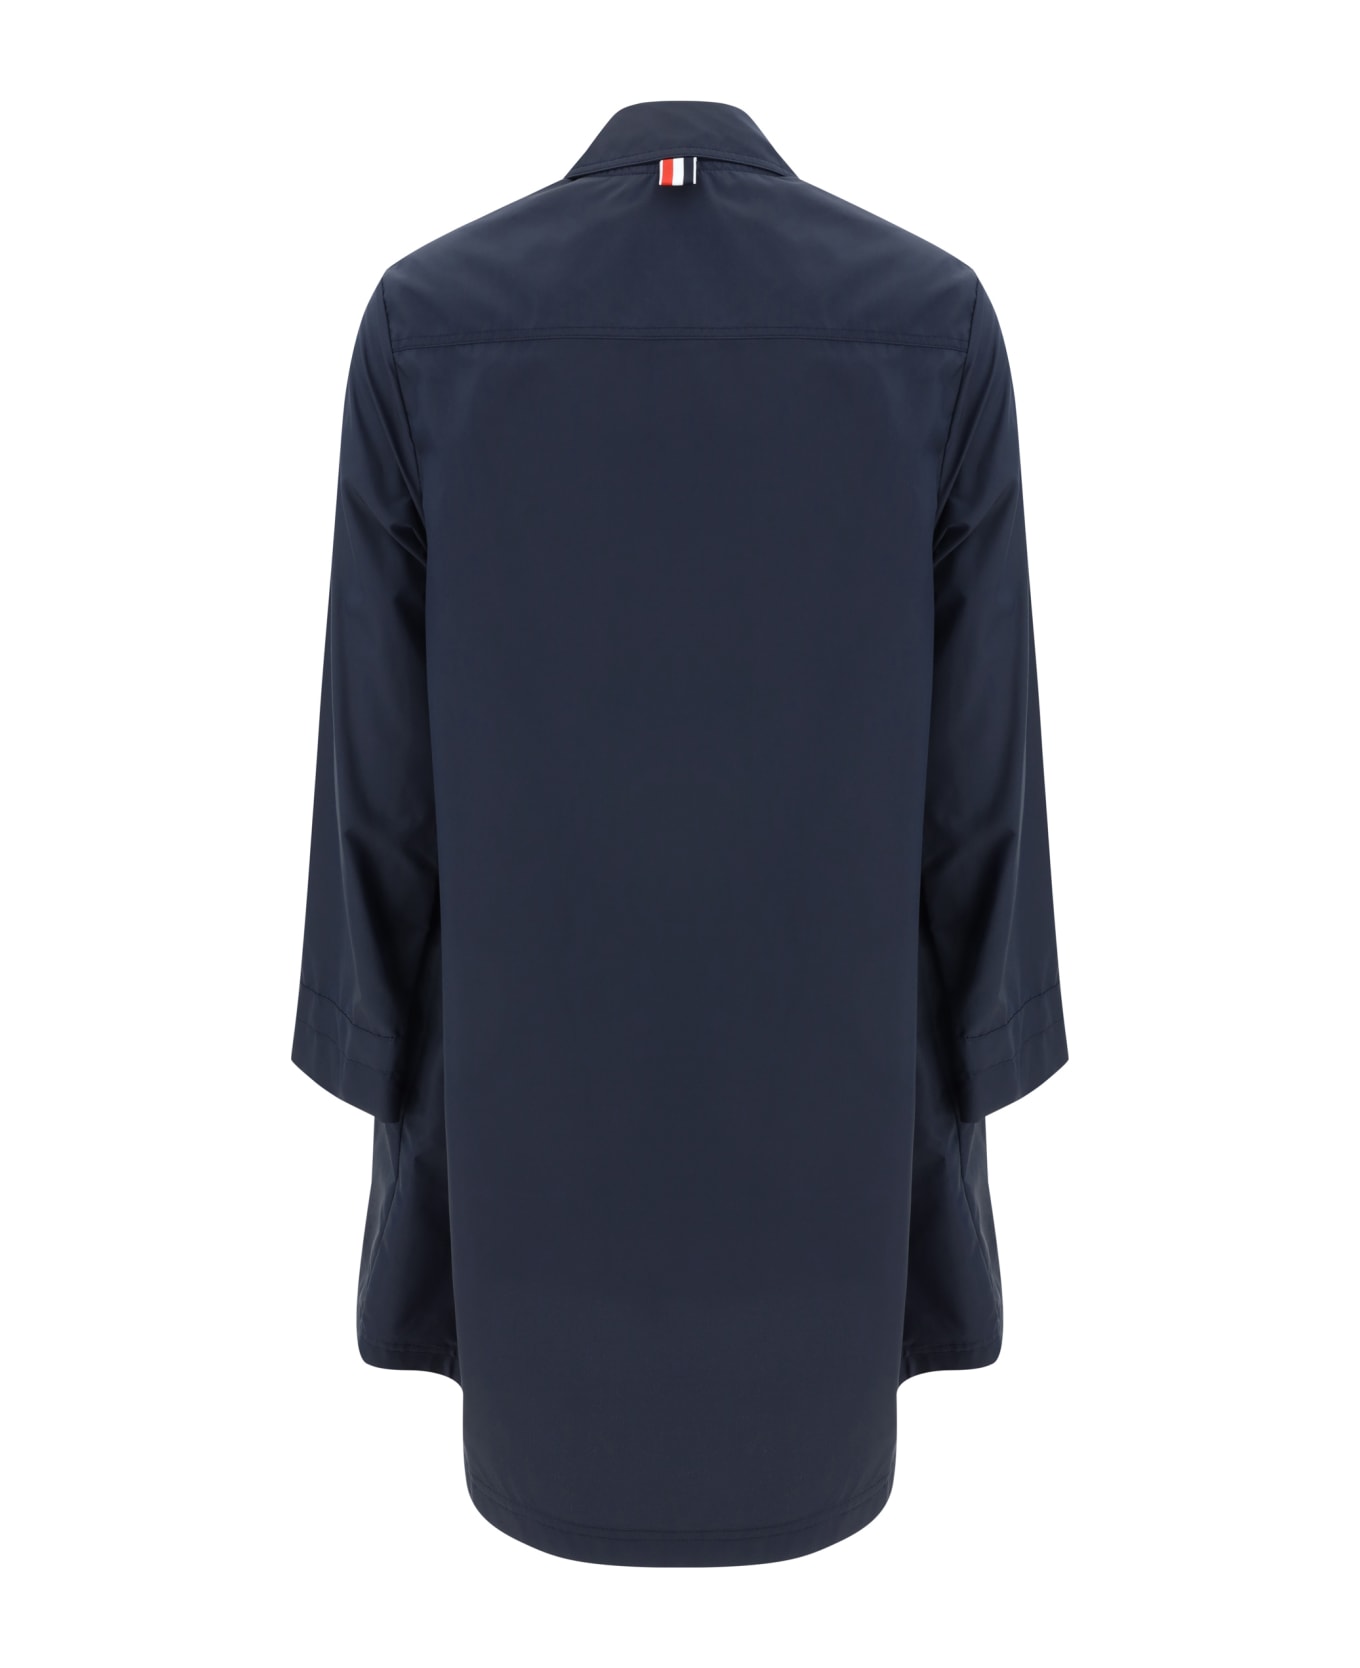 Thom Browne Trench Coat - Navy